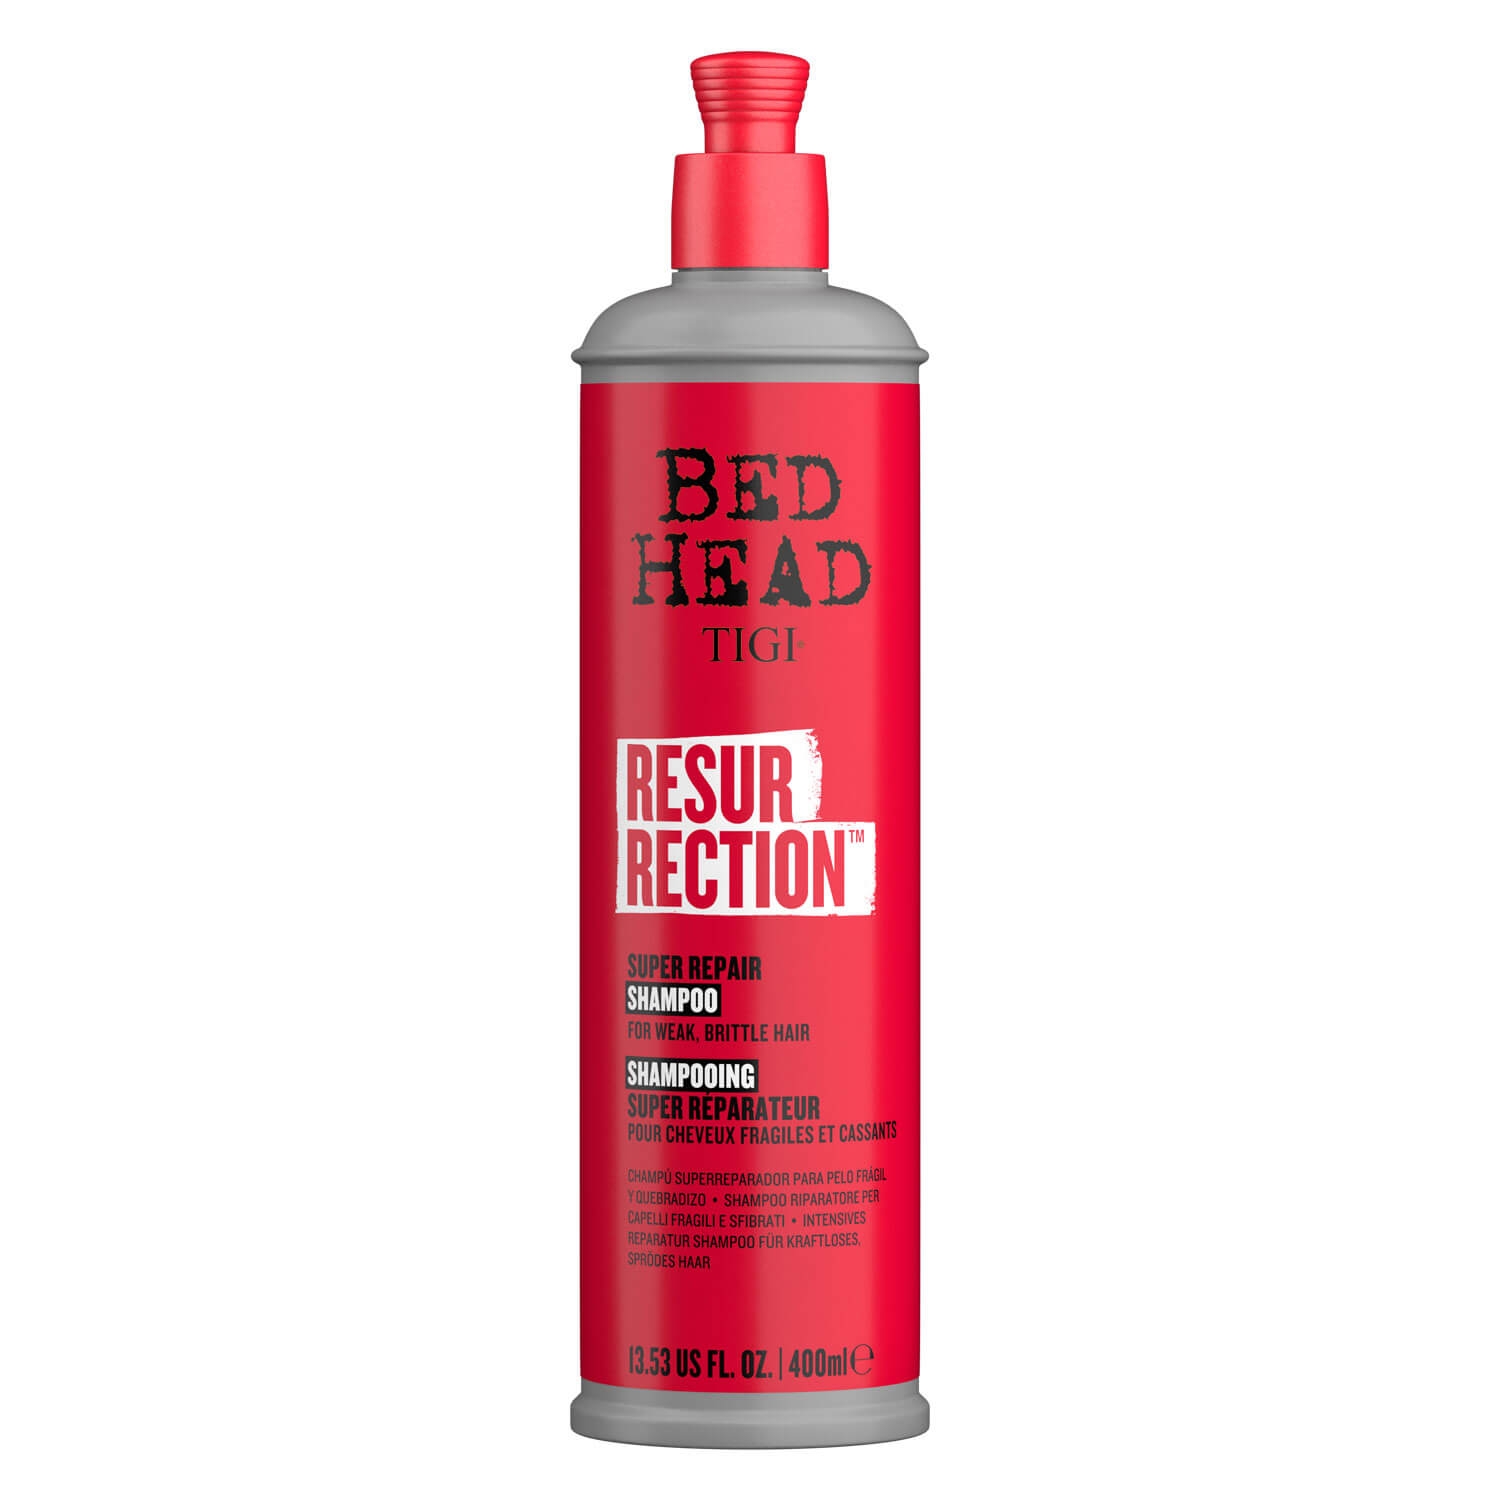 Product image from Bed Head Urban Antidotes - Resurrection Super Repair Shampoo